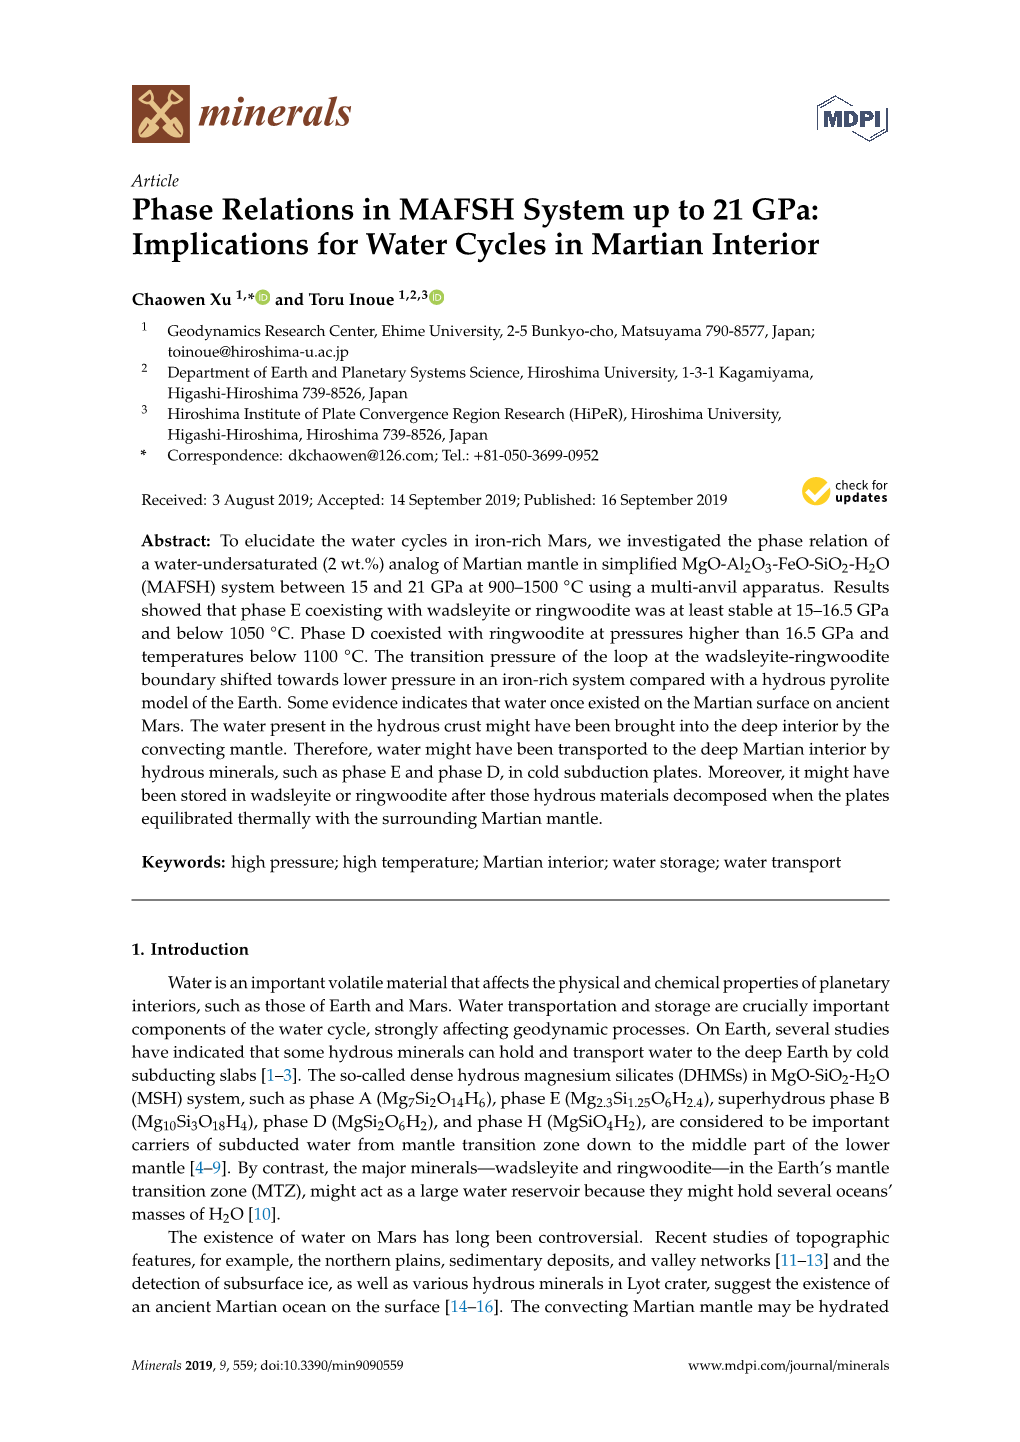 Phase Relations in MAFSH System up to 21 Gpa: Implications for Water Cycles in Martian Interior